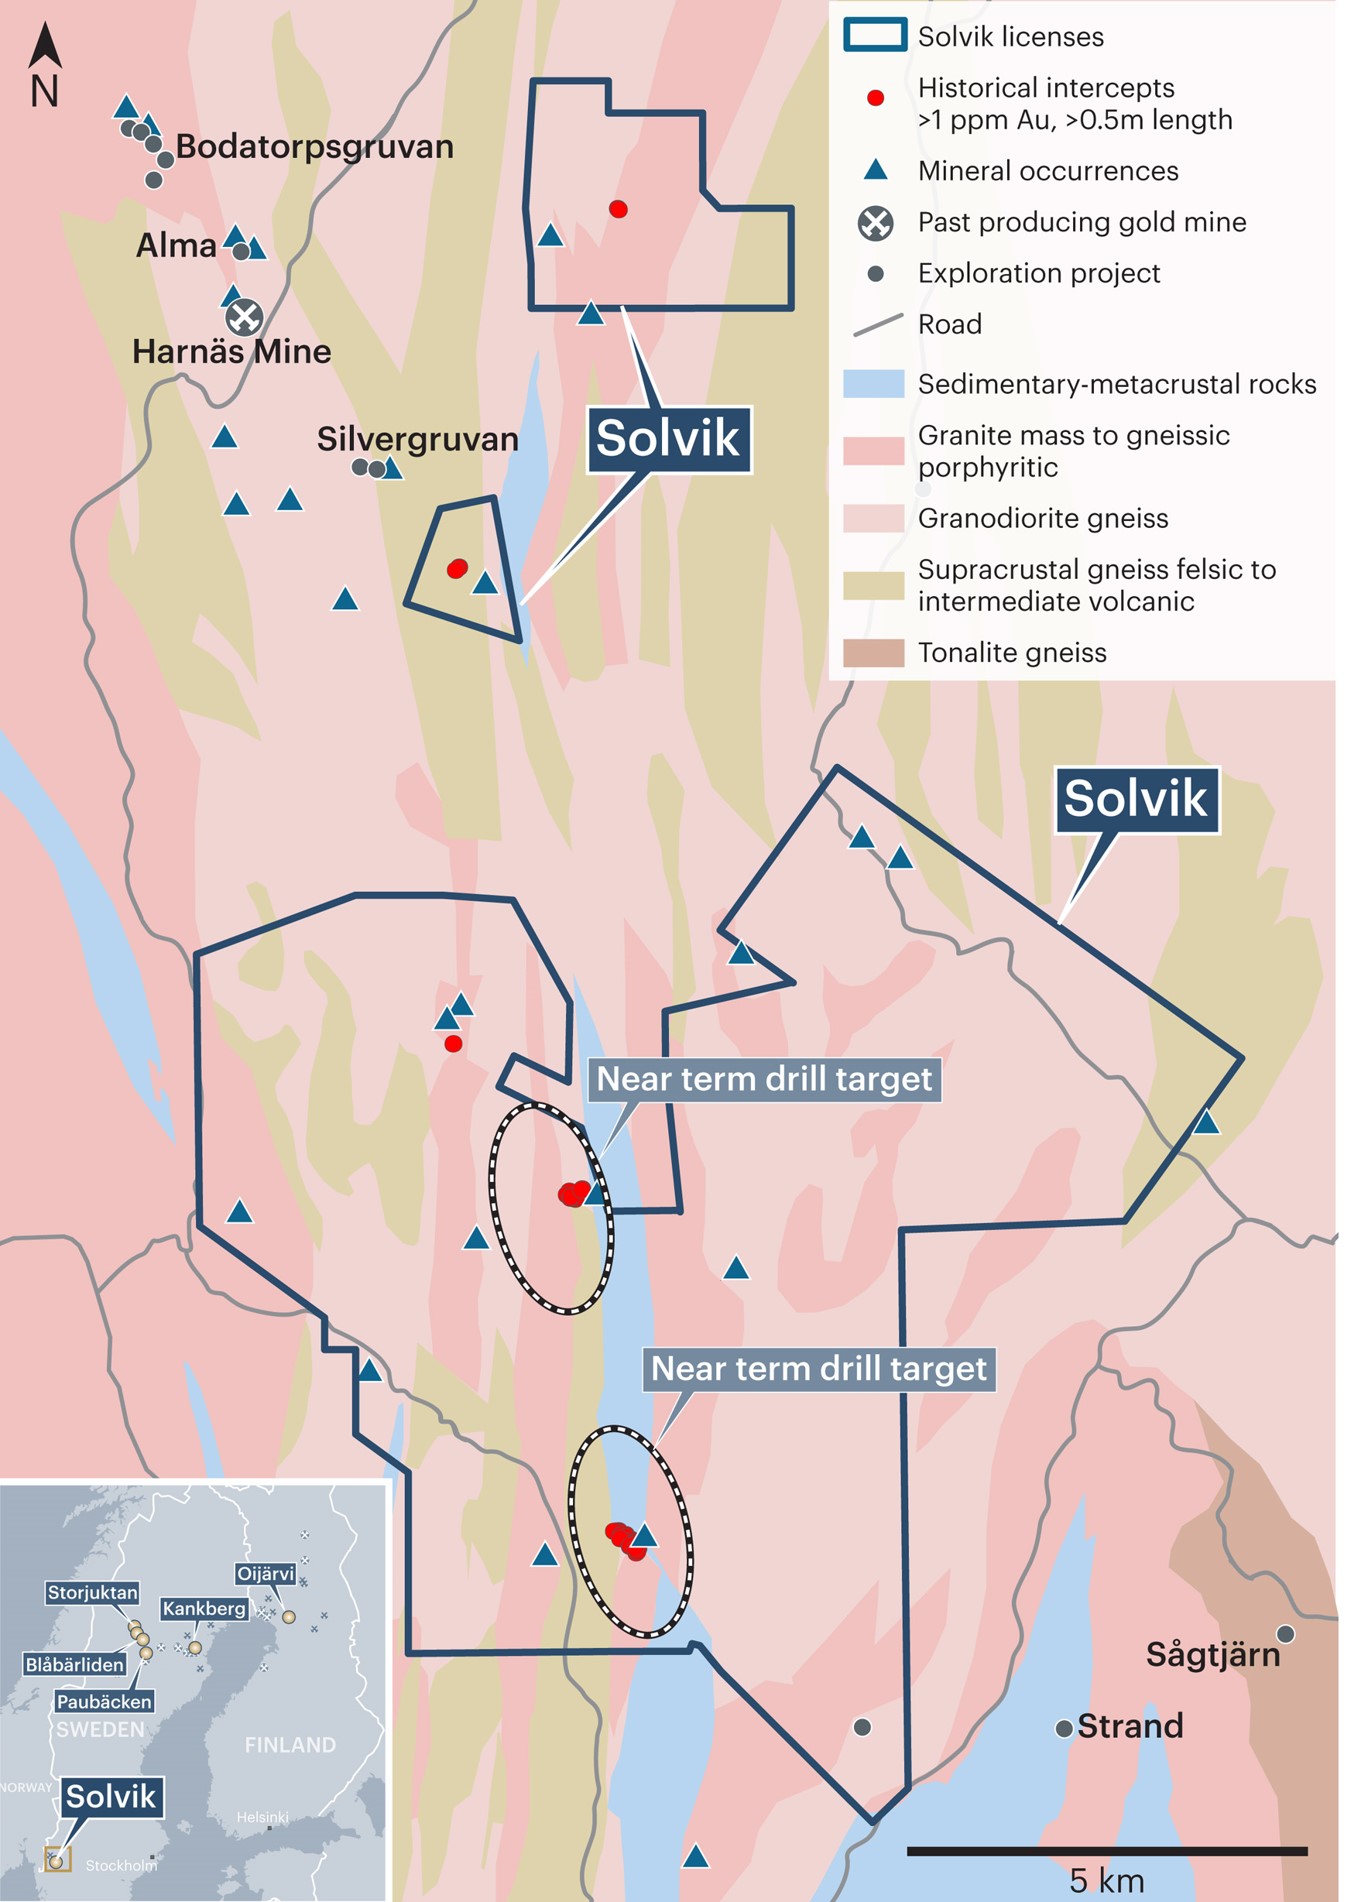 Solvik project geology, minerals occurrences and location.